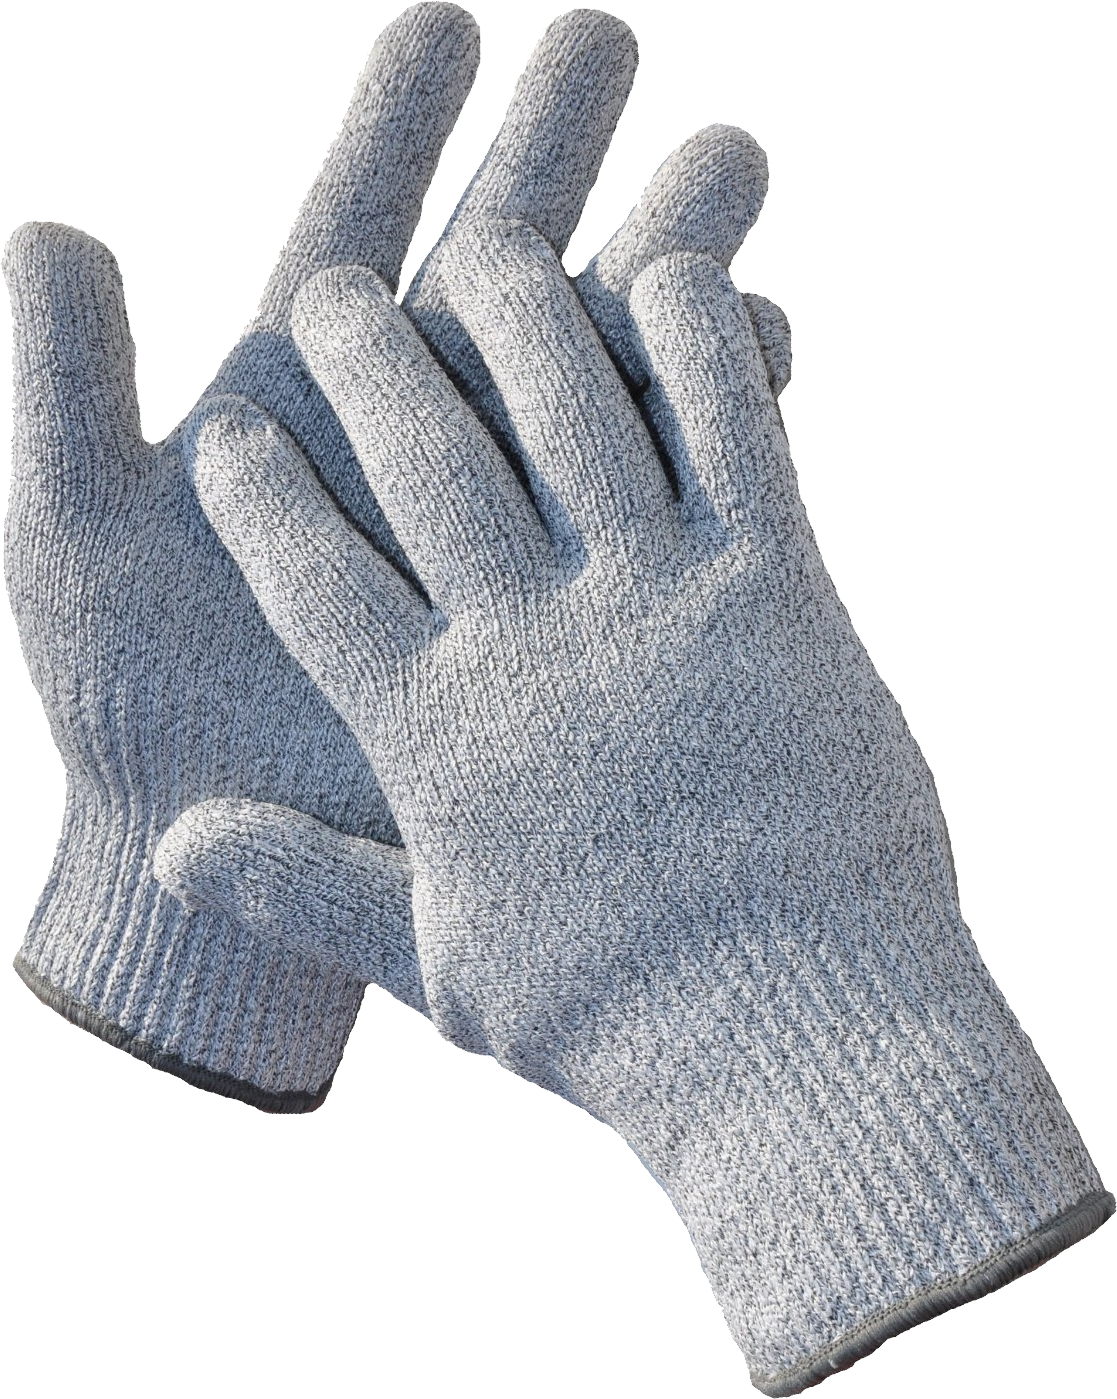 glove clipart winter thing